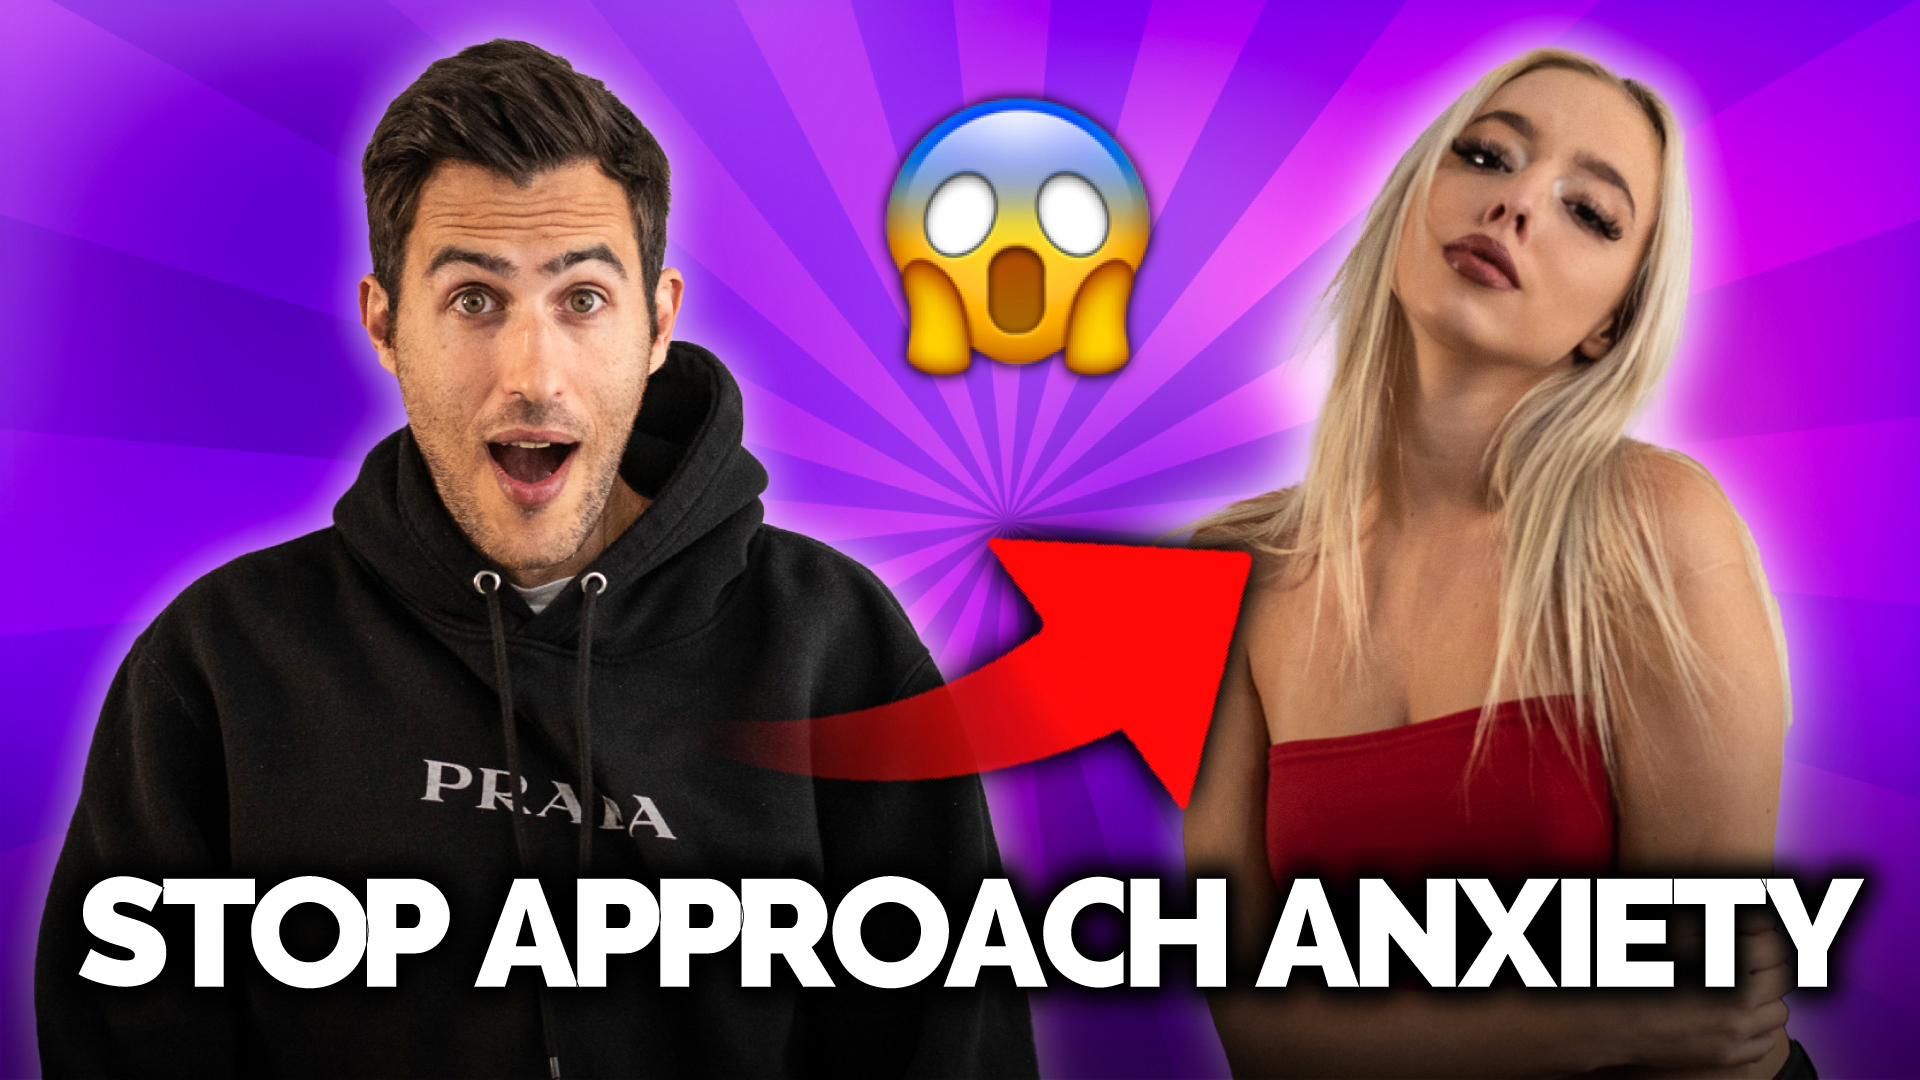 How to overcome approach anxiety with hot women